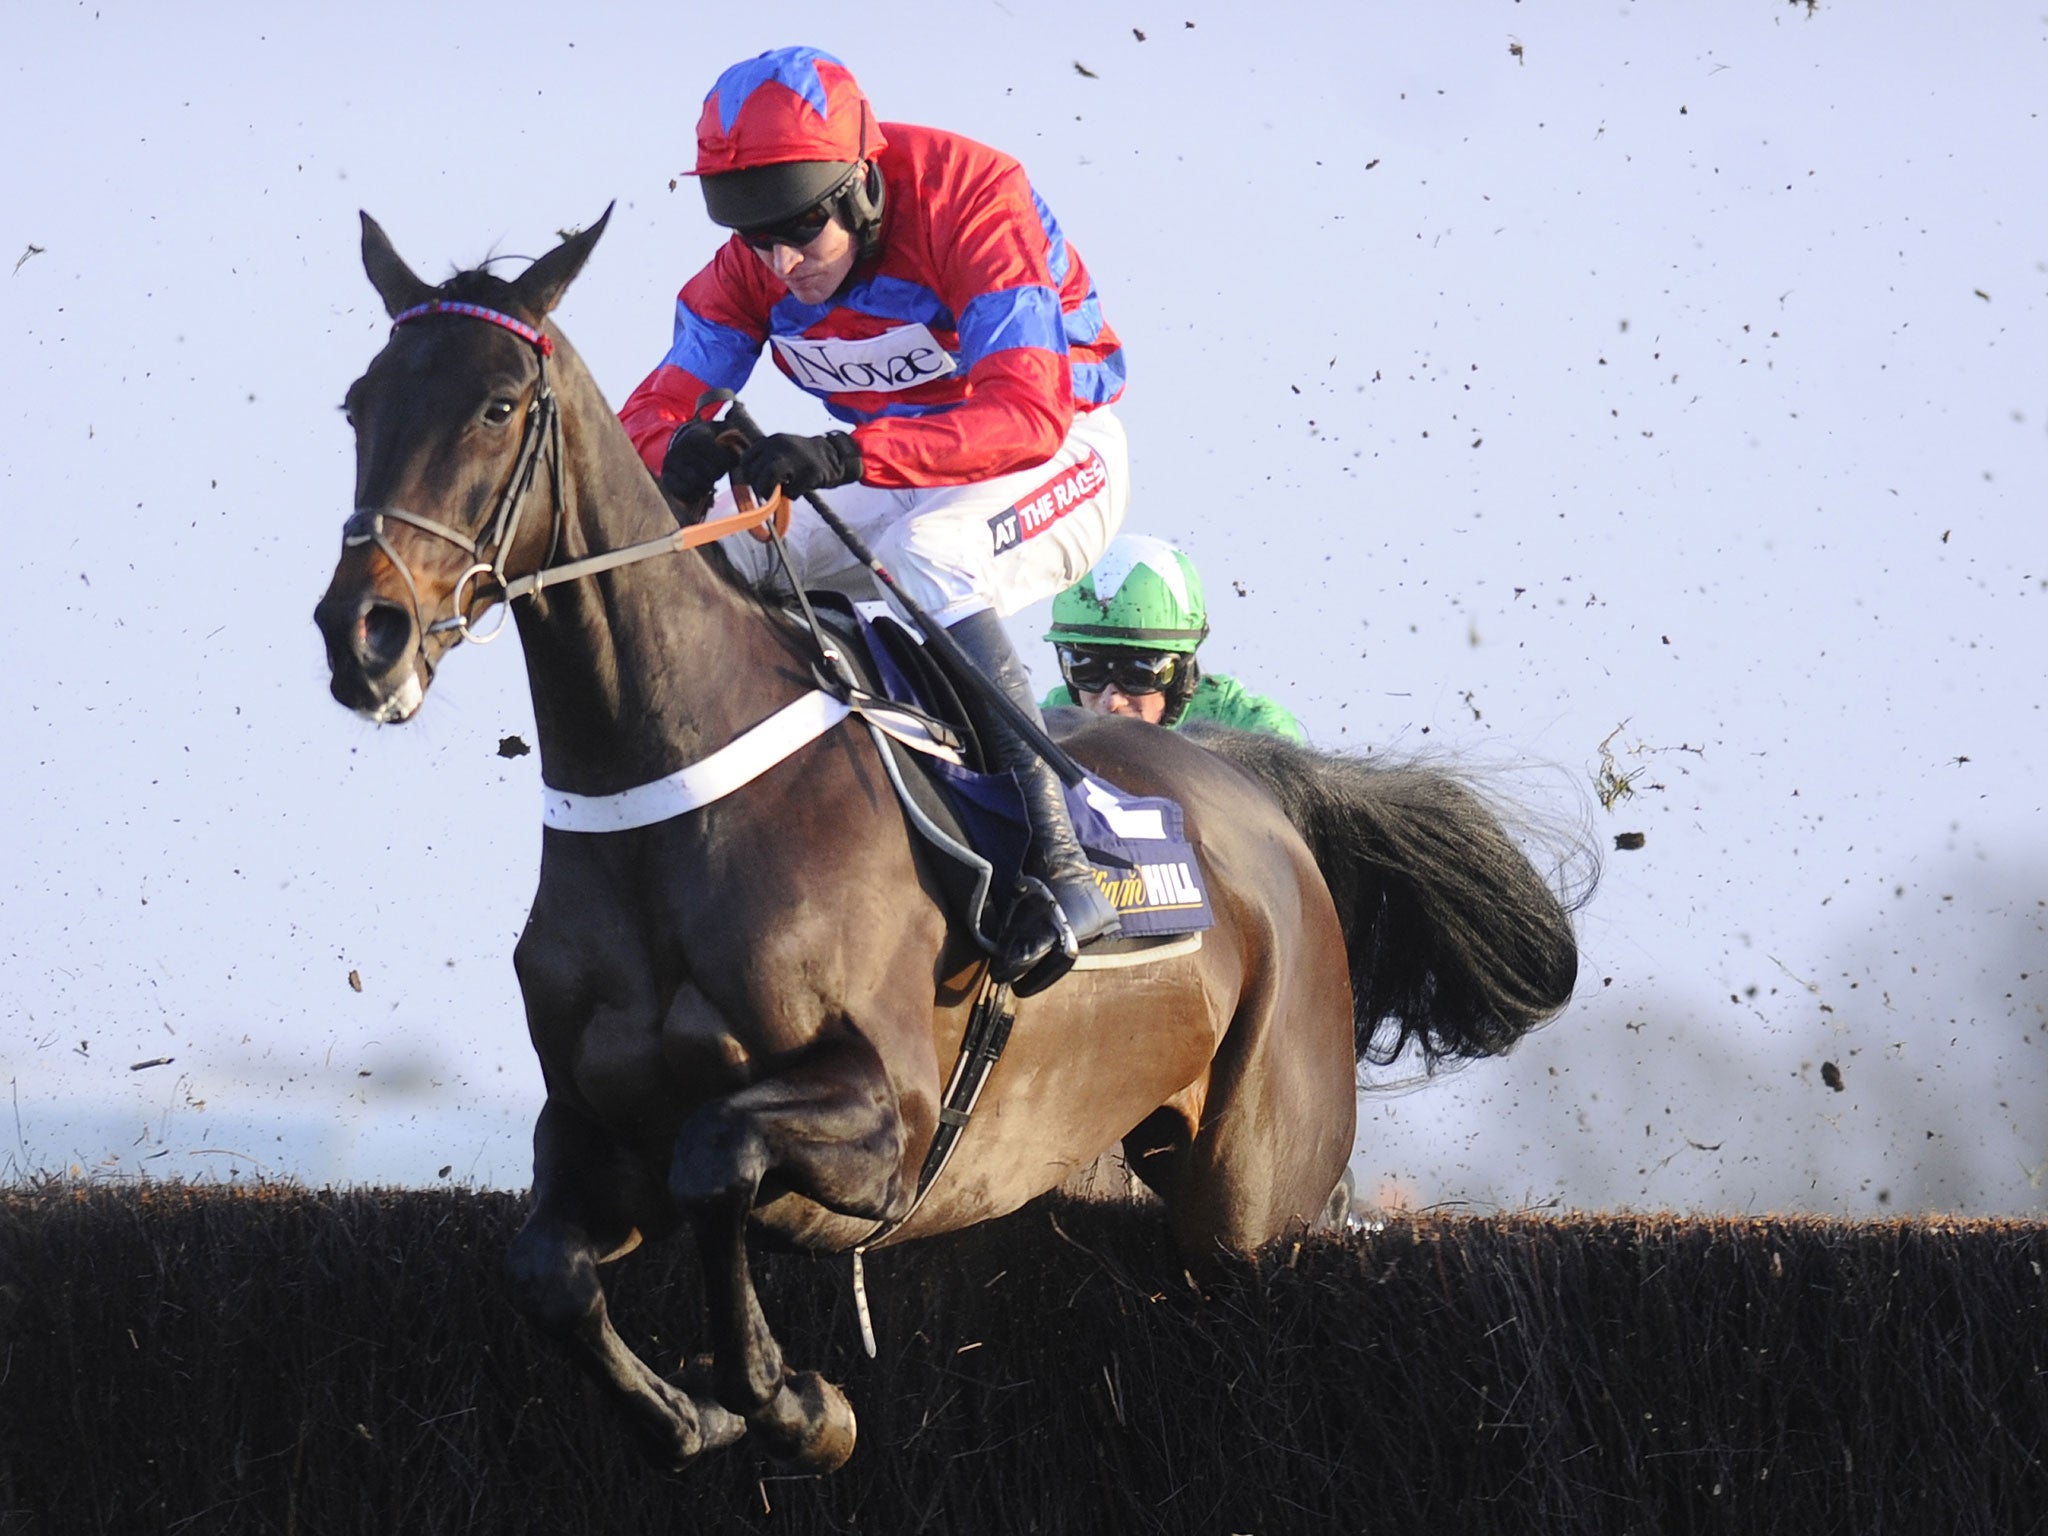 Sprinter Sacre pleased connections yesterday after his Kempton scare